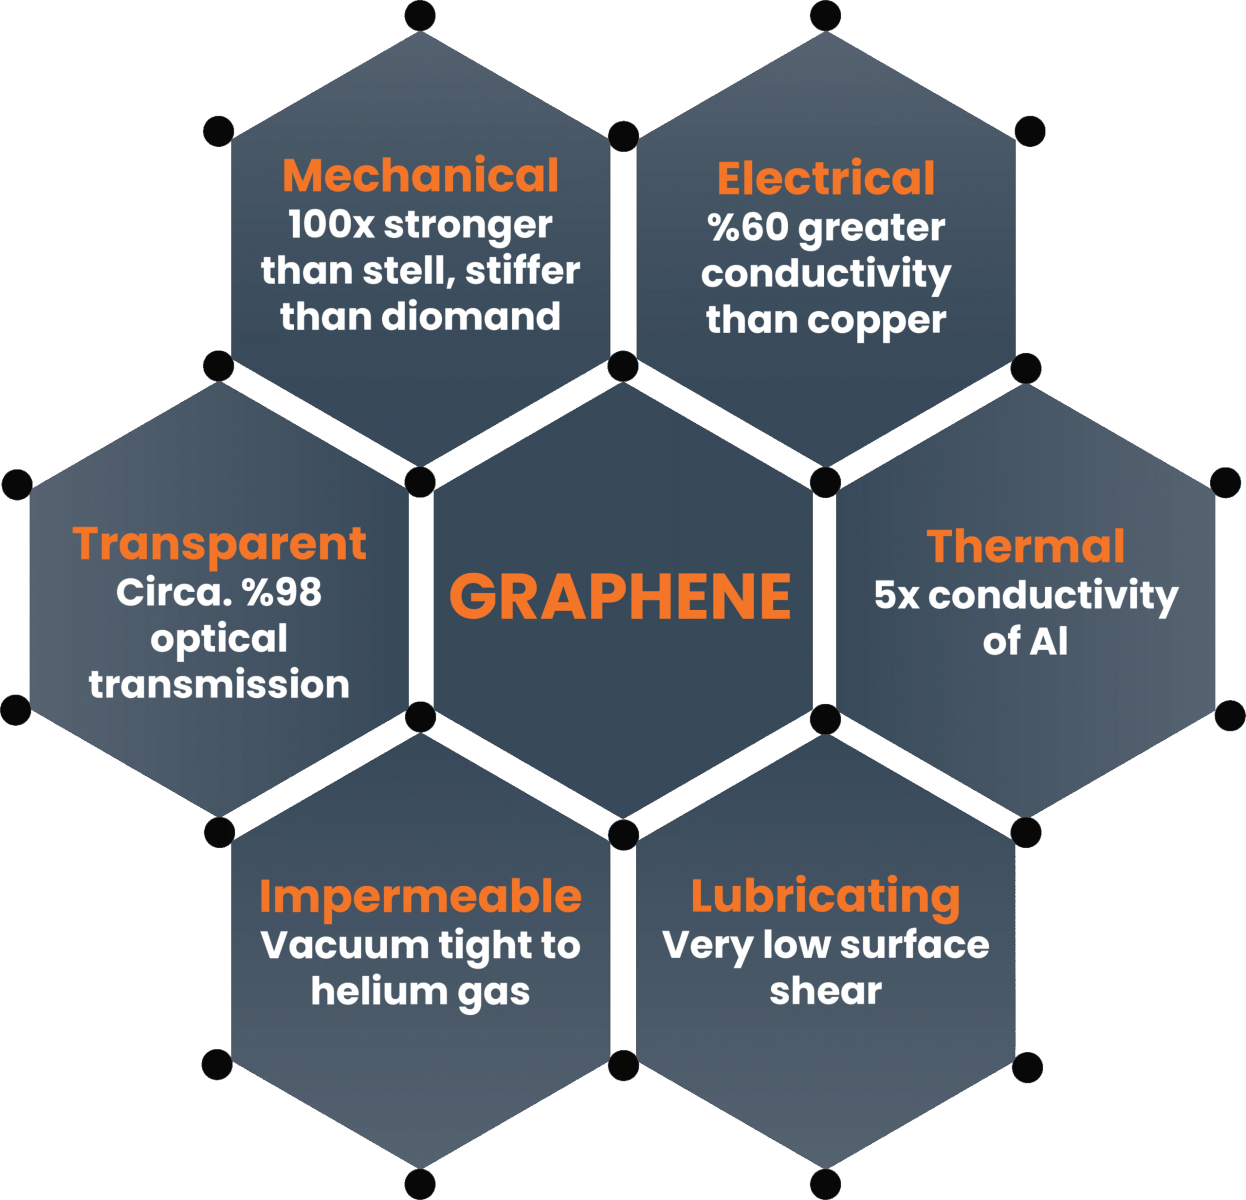 Graphene composites are used in aerospace, automotive, sports equipment and construction. Graphene is used for high-performance batteries and super-capacitors, touchscreens, and conductive inks. Graphene sheets are used in biomedical applications because it is being hydrophobic and repel polar solvents. Graphene-based sensors are used for environmental monitoring, healthcare and wearable devices. Graphene oxide membranes are used for water purification and desalination. Graphene-based masks were made during COVID. Graphene coatings also act as protective coatings with superior chemical, moisture, corrosion, UV, and fire-resistance properties. Graphene aerogel is used in supercapacitors, lithium-ion batteries, environment purposes, solar or fuel cells, etc.